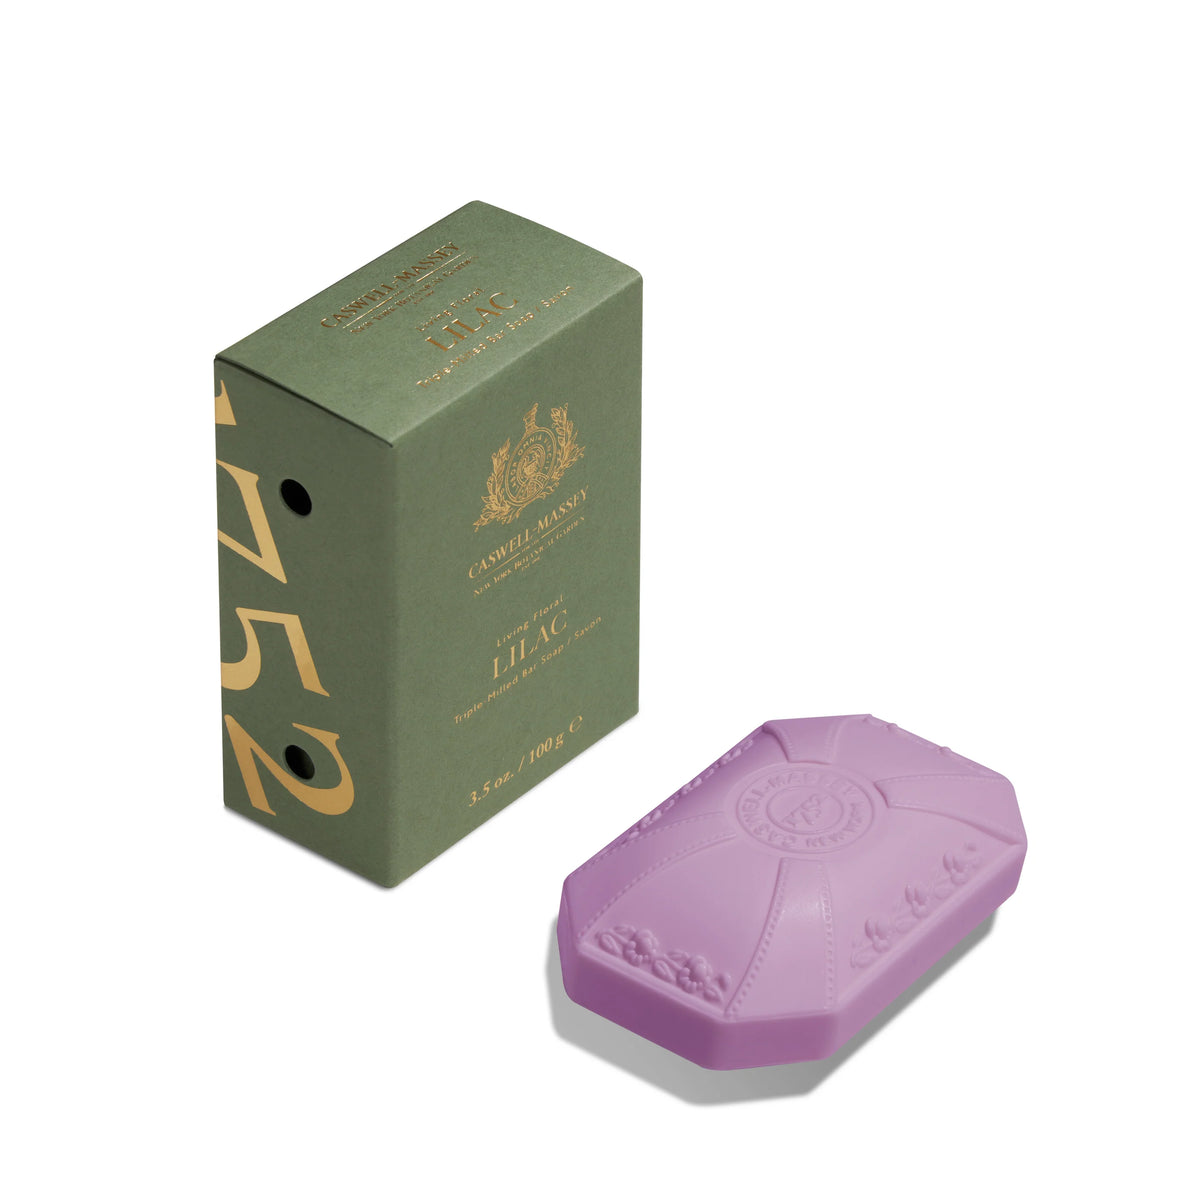 A lavender-colored bar of Caswell - Massey Lilac Luxury Bar Soap lying in front of its green packaging box, which features elegant gold text and design elements. The soap is embossed with ornate details and a